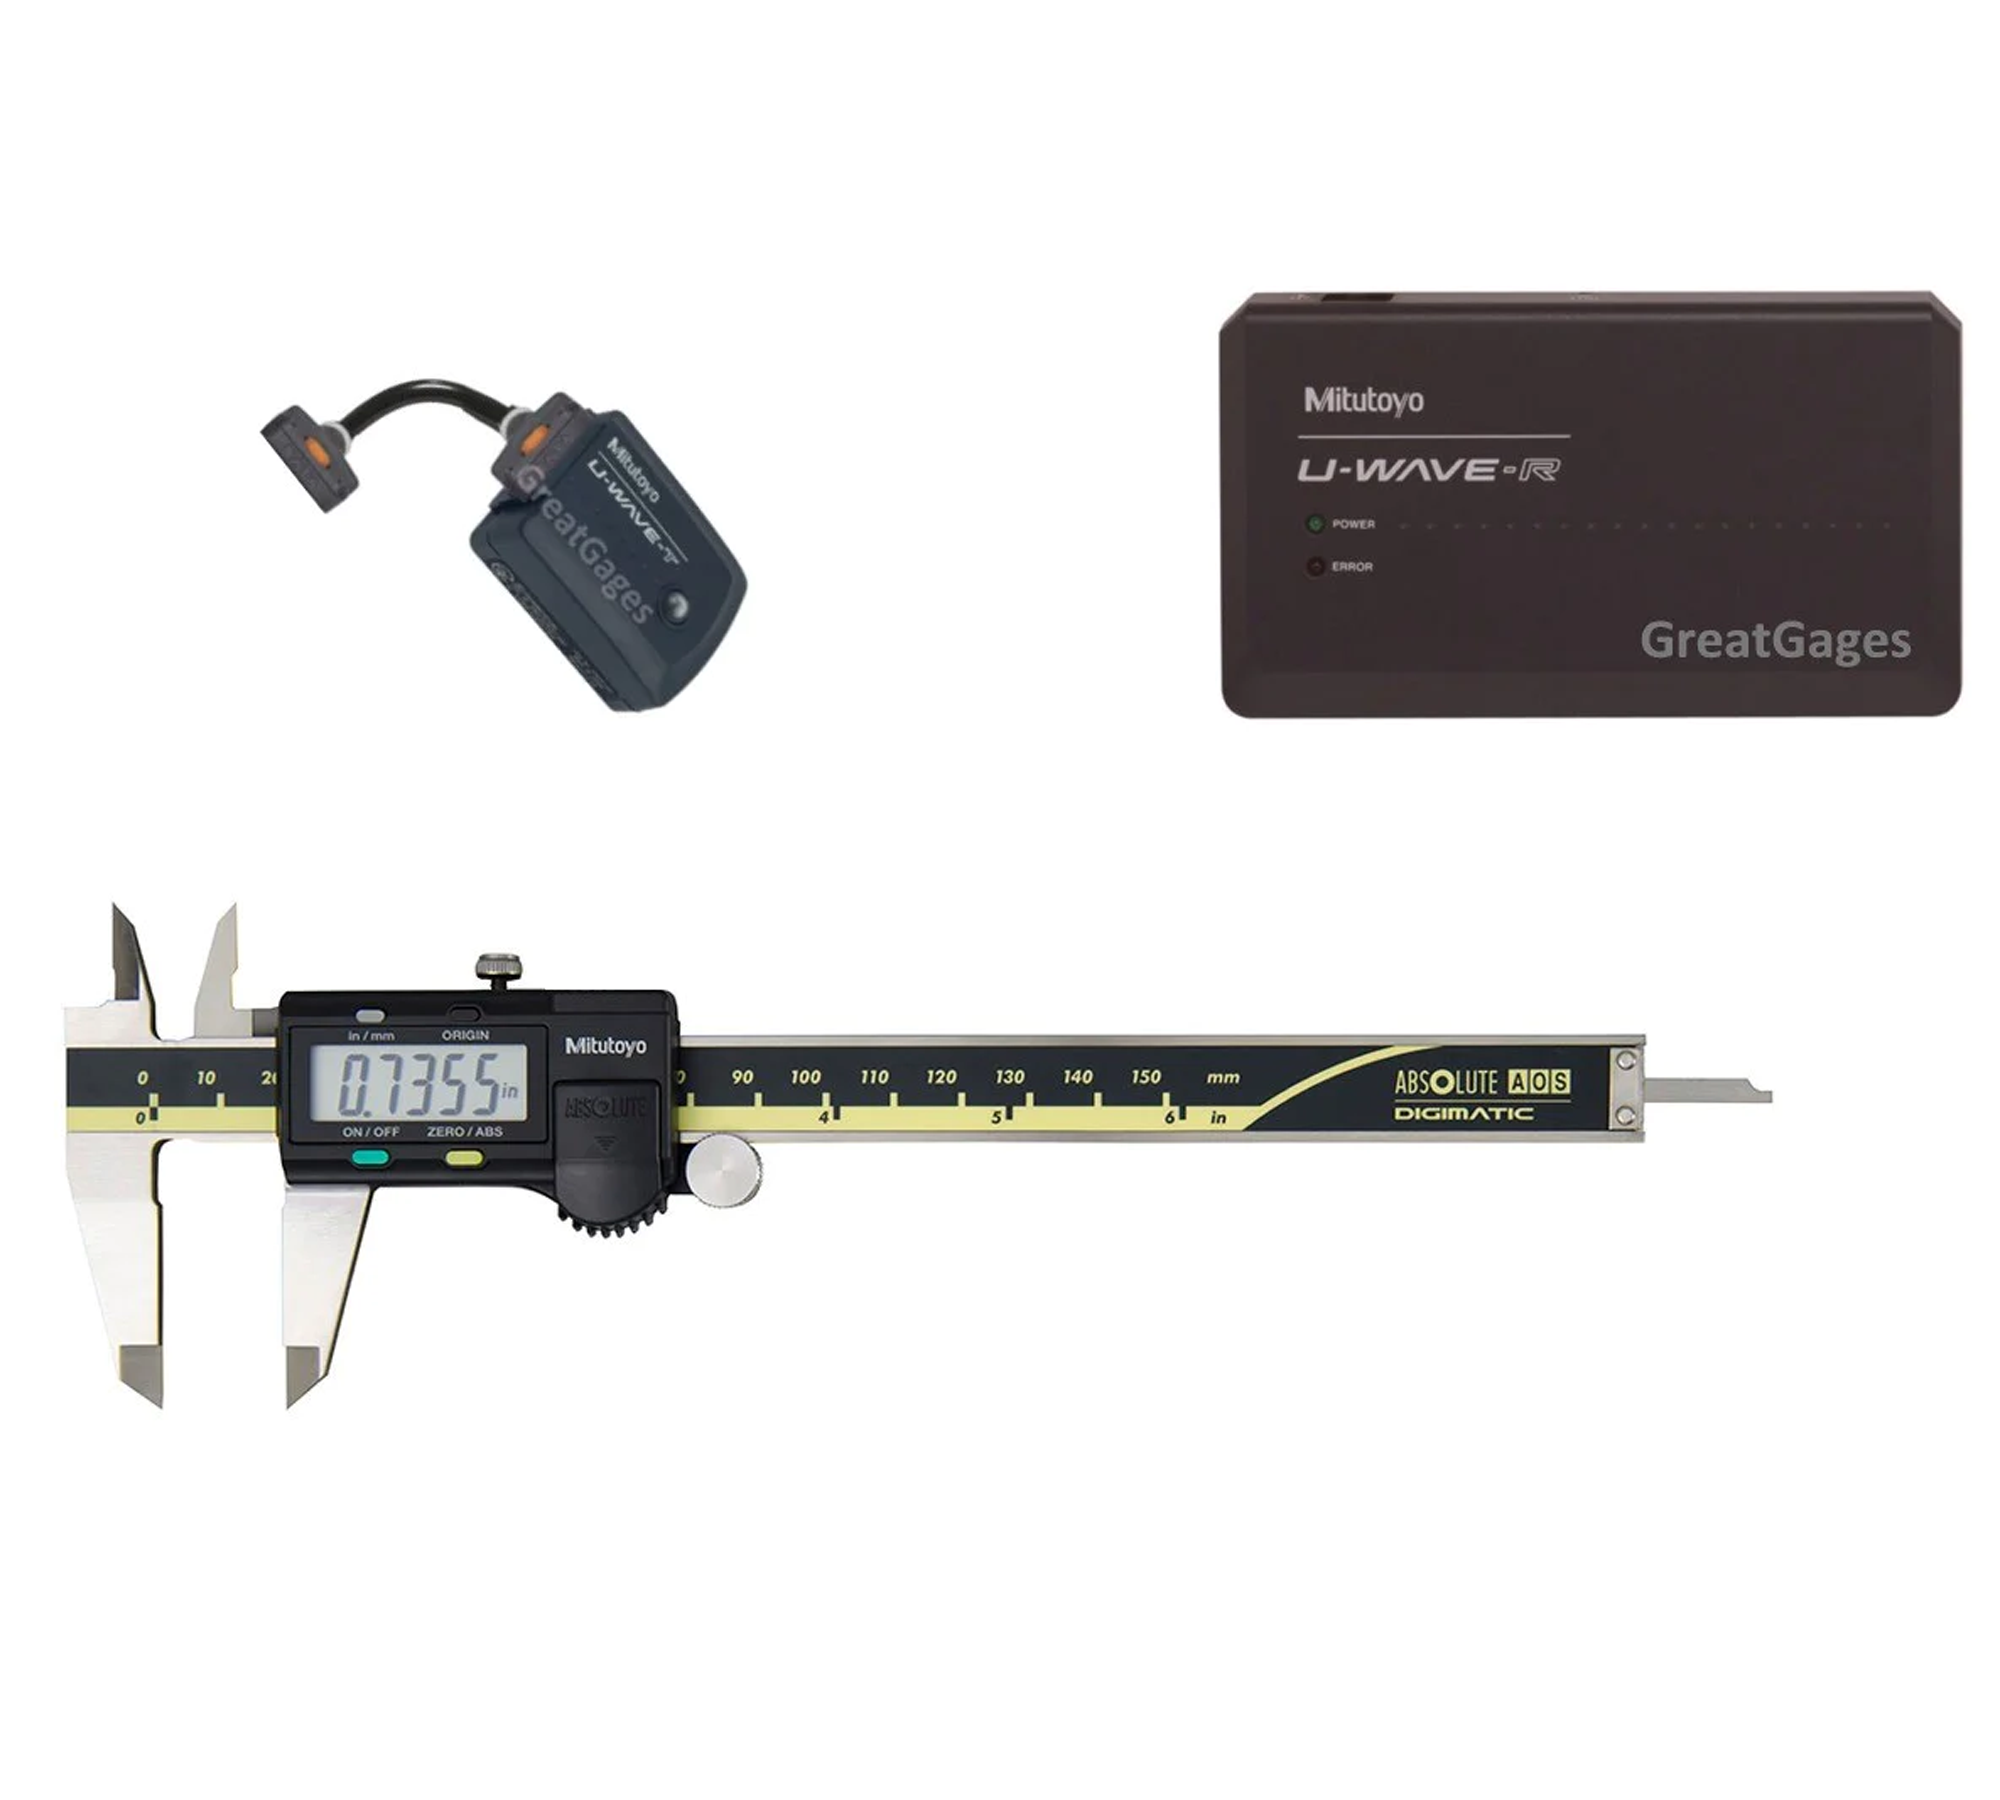 Shop Caliper to PC Wireless interface Packages at GreatGages.com